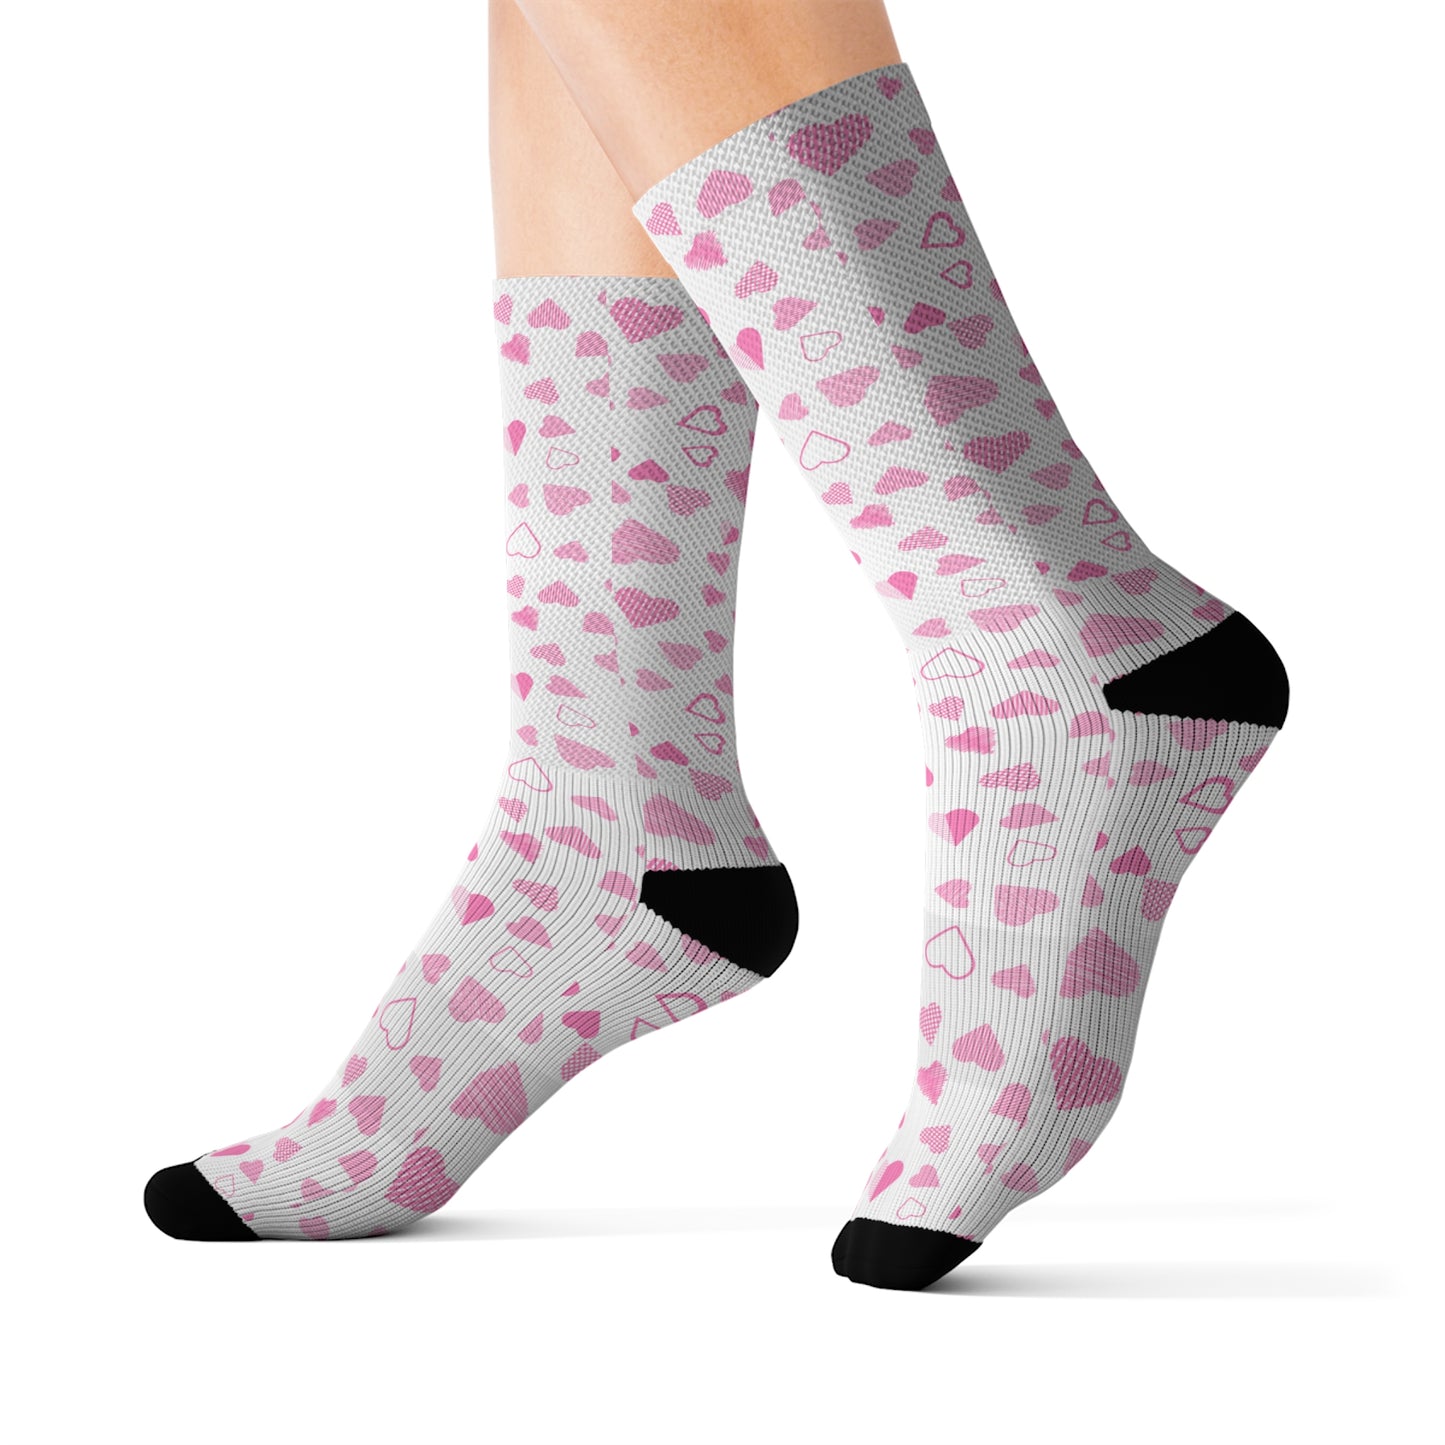 Heart Socks, Groom and Bridal Gifts, Men and Women Love Presents